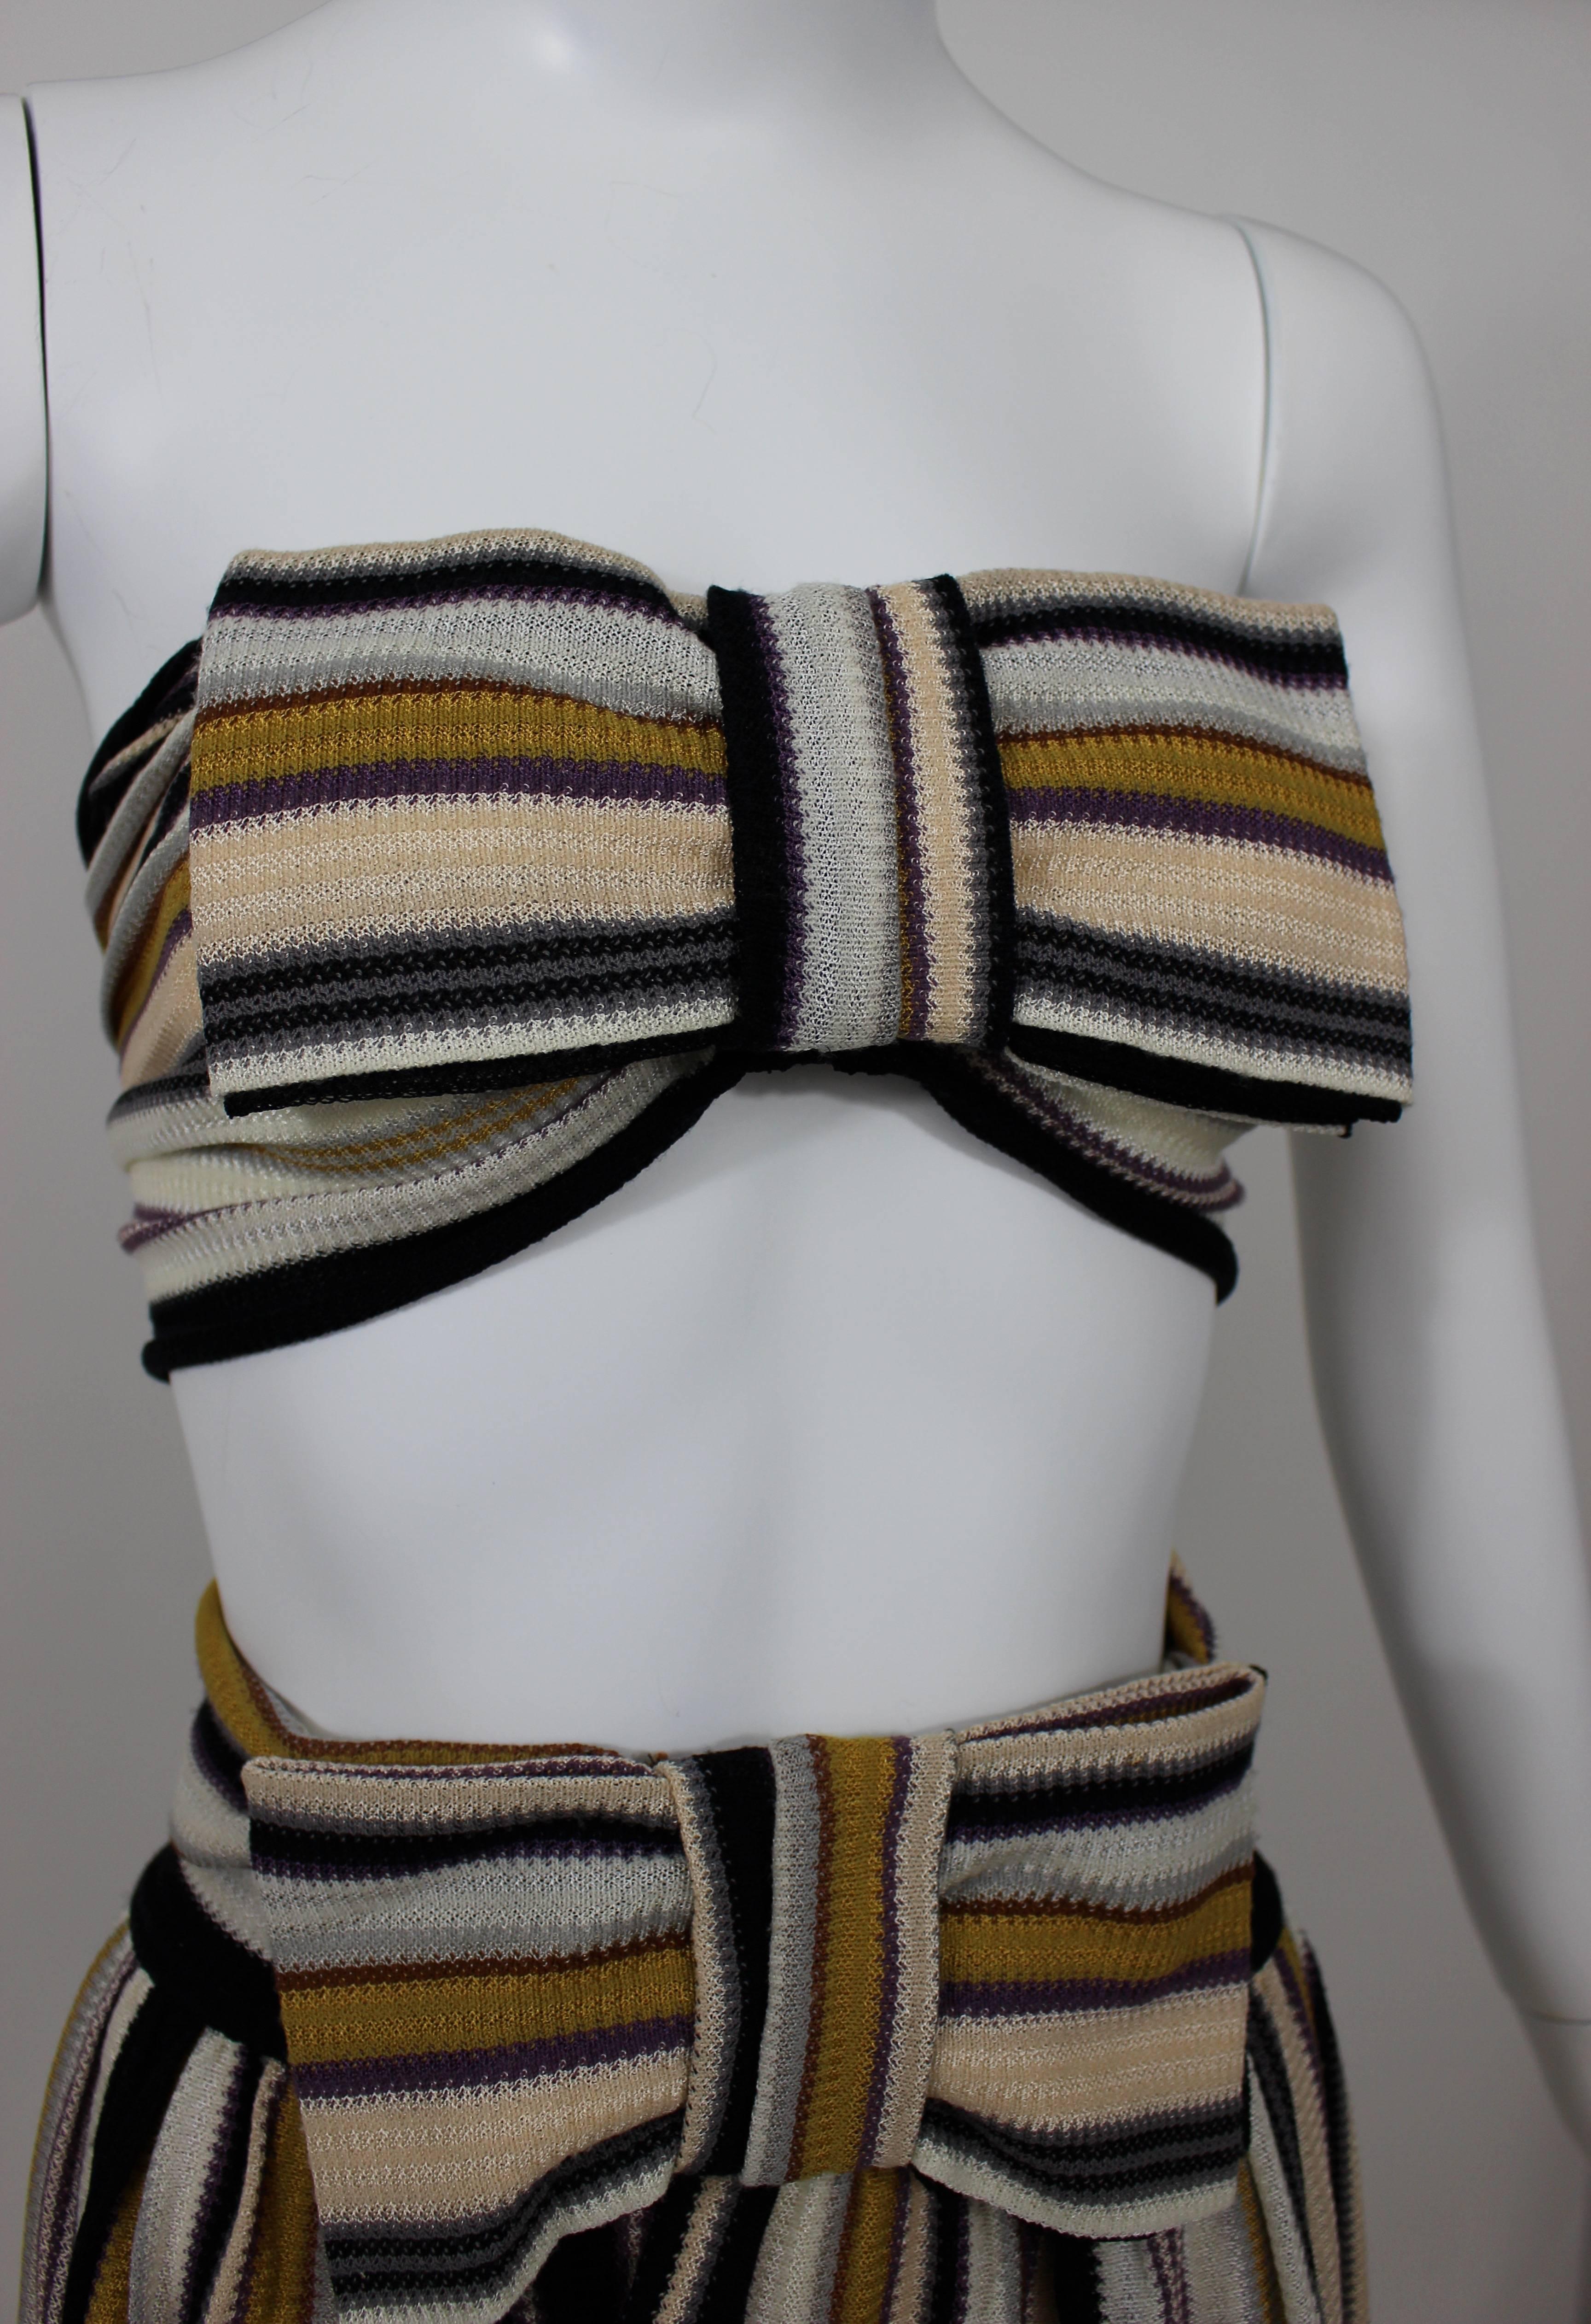 Missoni Bow top and matching skirt. In signature Missoni stripe print.

Size estimate: XS/S
Measurements:
Bandeau Top:
Bust: 32-34 inches
Skirt:
Waist: 25 inches
Hips: 34 inches 
Length: 23 Inches